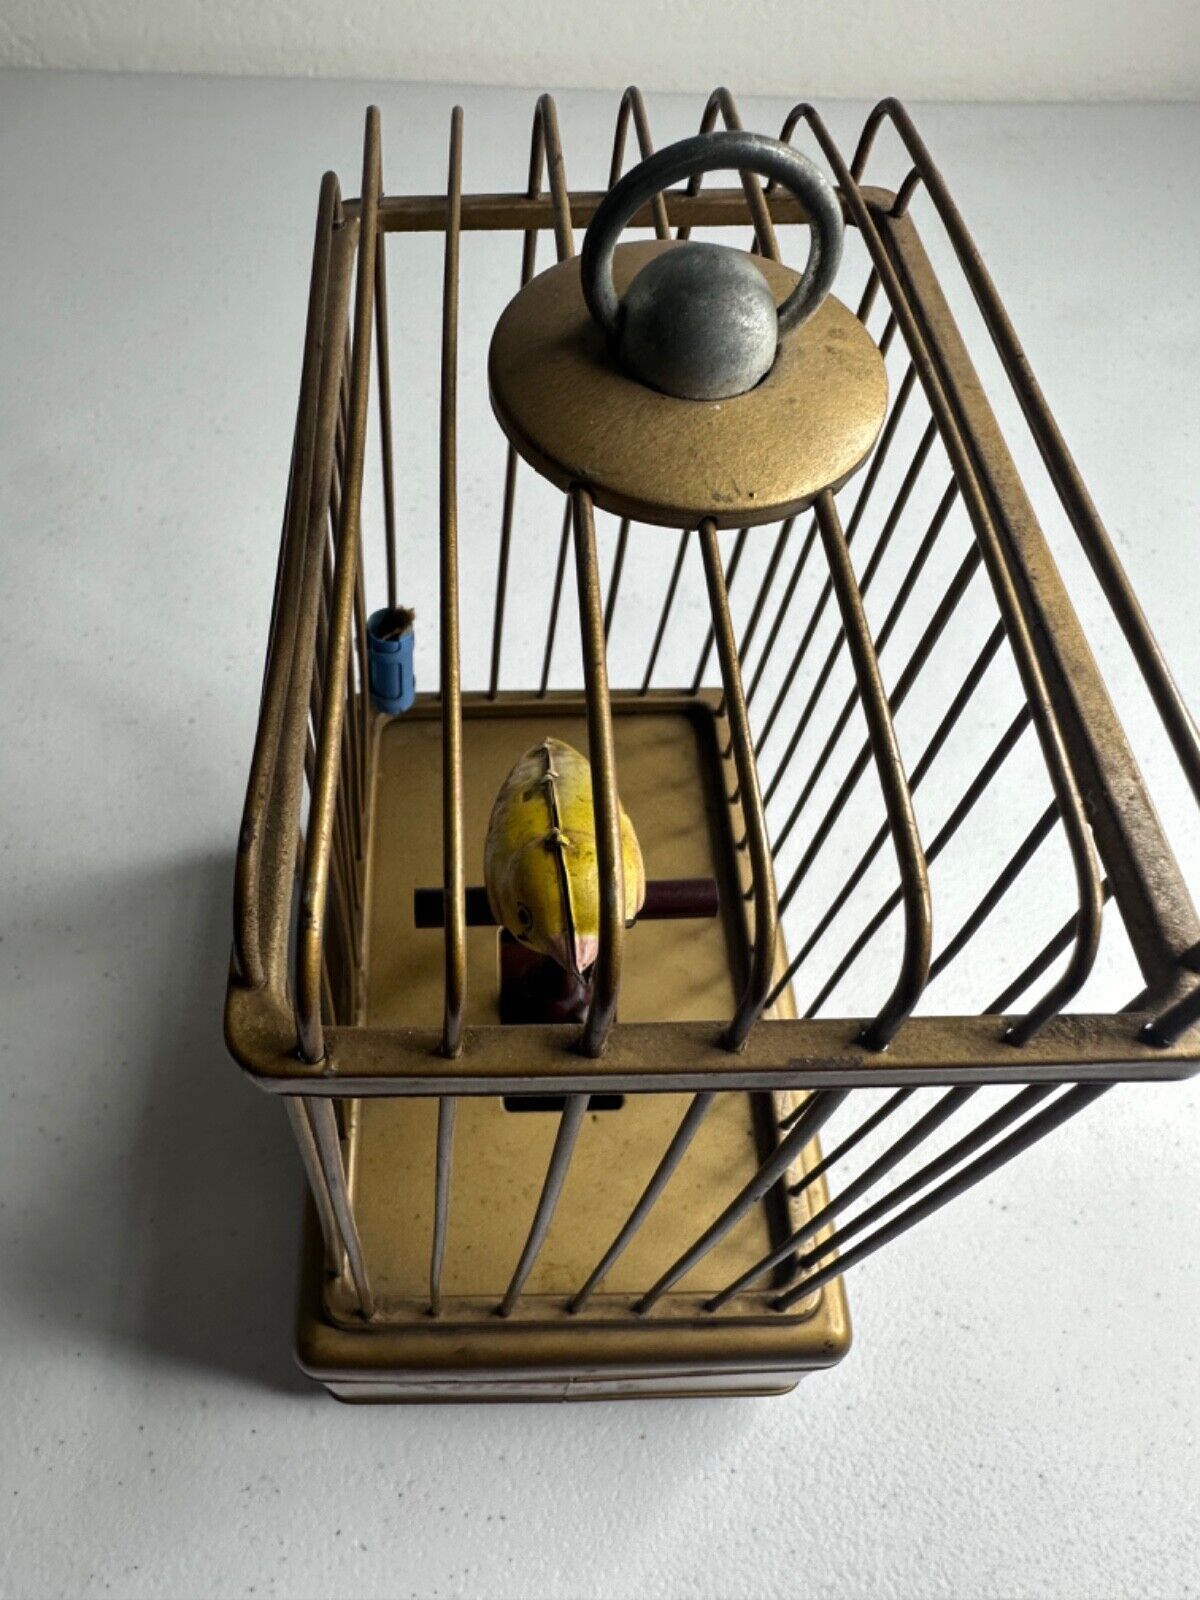 Antique 1930s Handcrafted Brass Bird Cage Toy - Vintage Battery Operated Home Decor - TreasuTiques